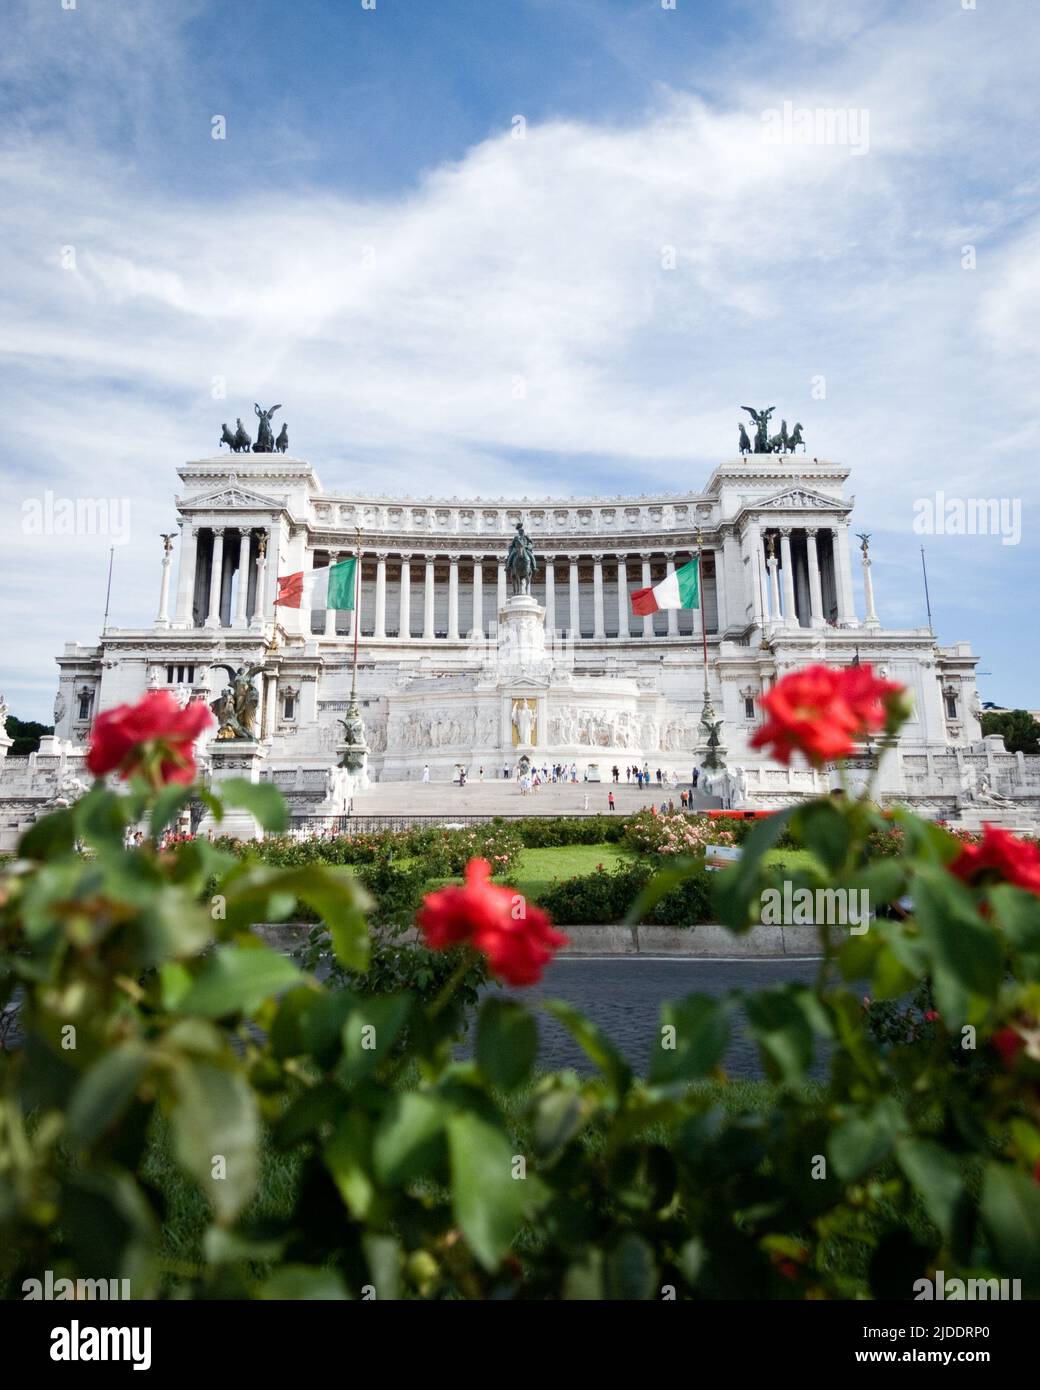 Monumento Nazionale a Vittorio Emanuele II, Rome, Italy. The Rome landmark known in English as the Victor Emmanuel II National Monument. Stock Photo